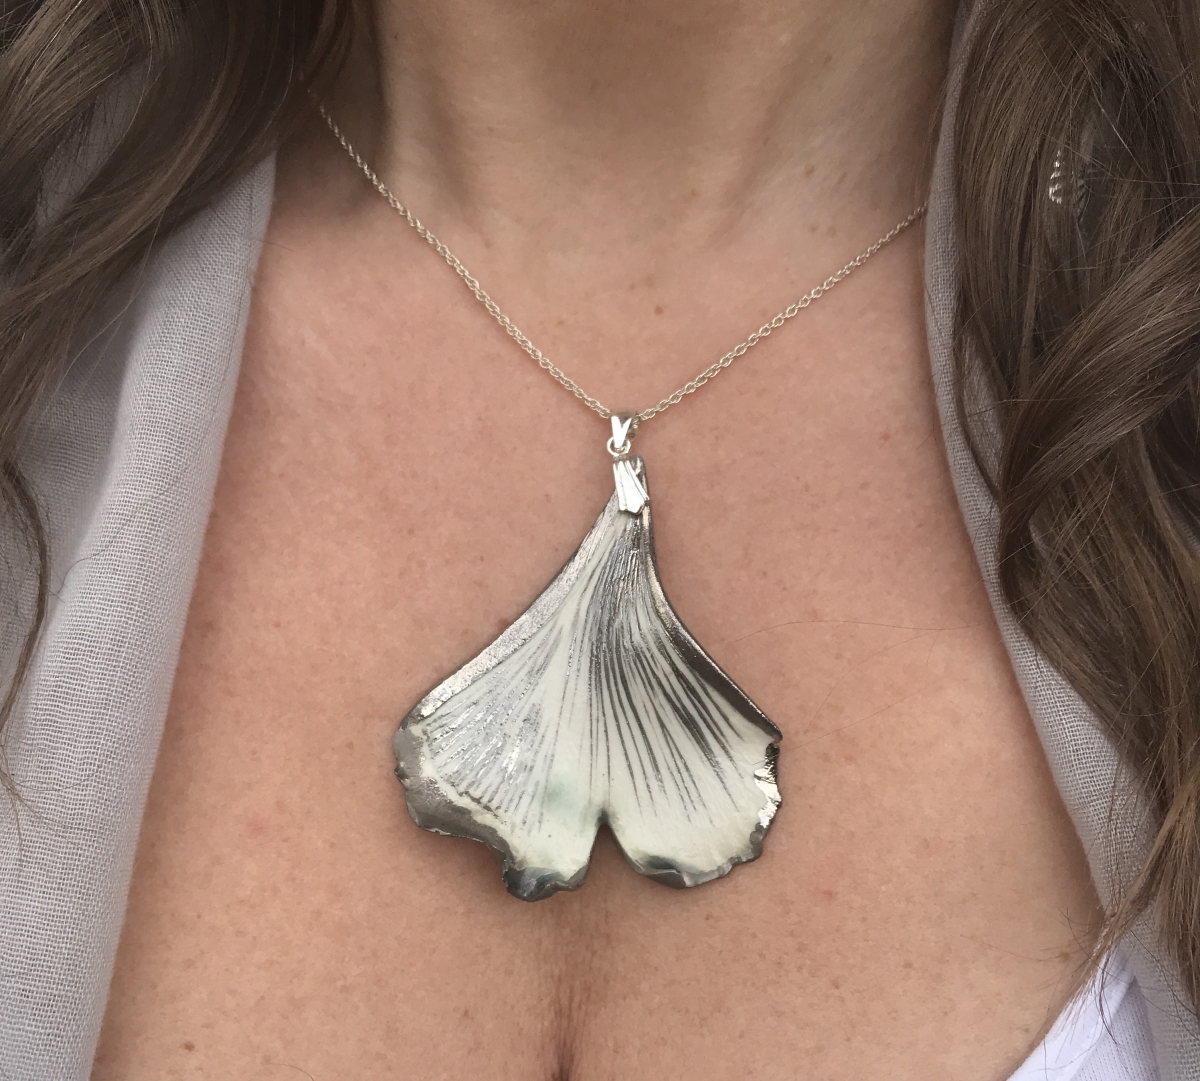 Ginkgo Leaf Pendant Ceramics inspired by Nature